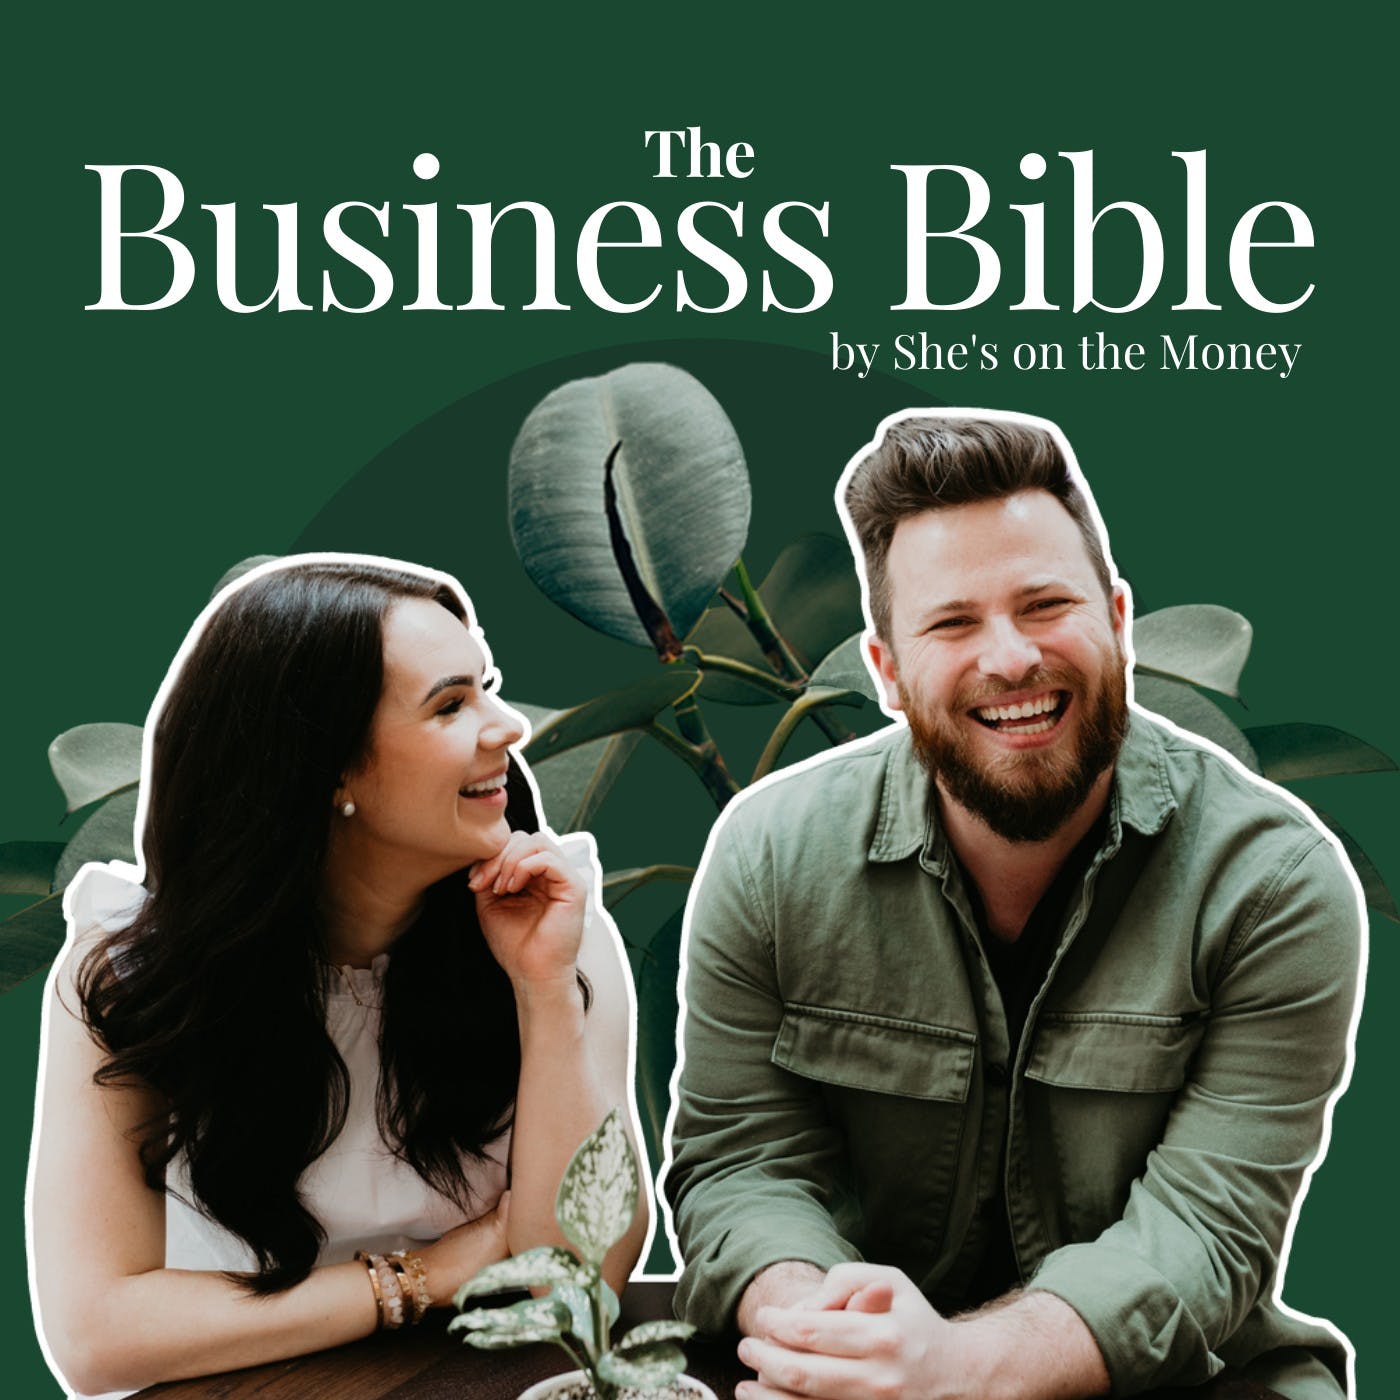 The Business Bible is Back!